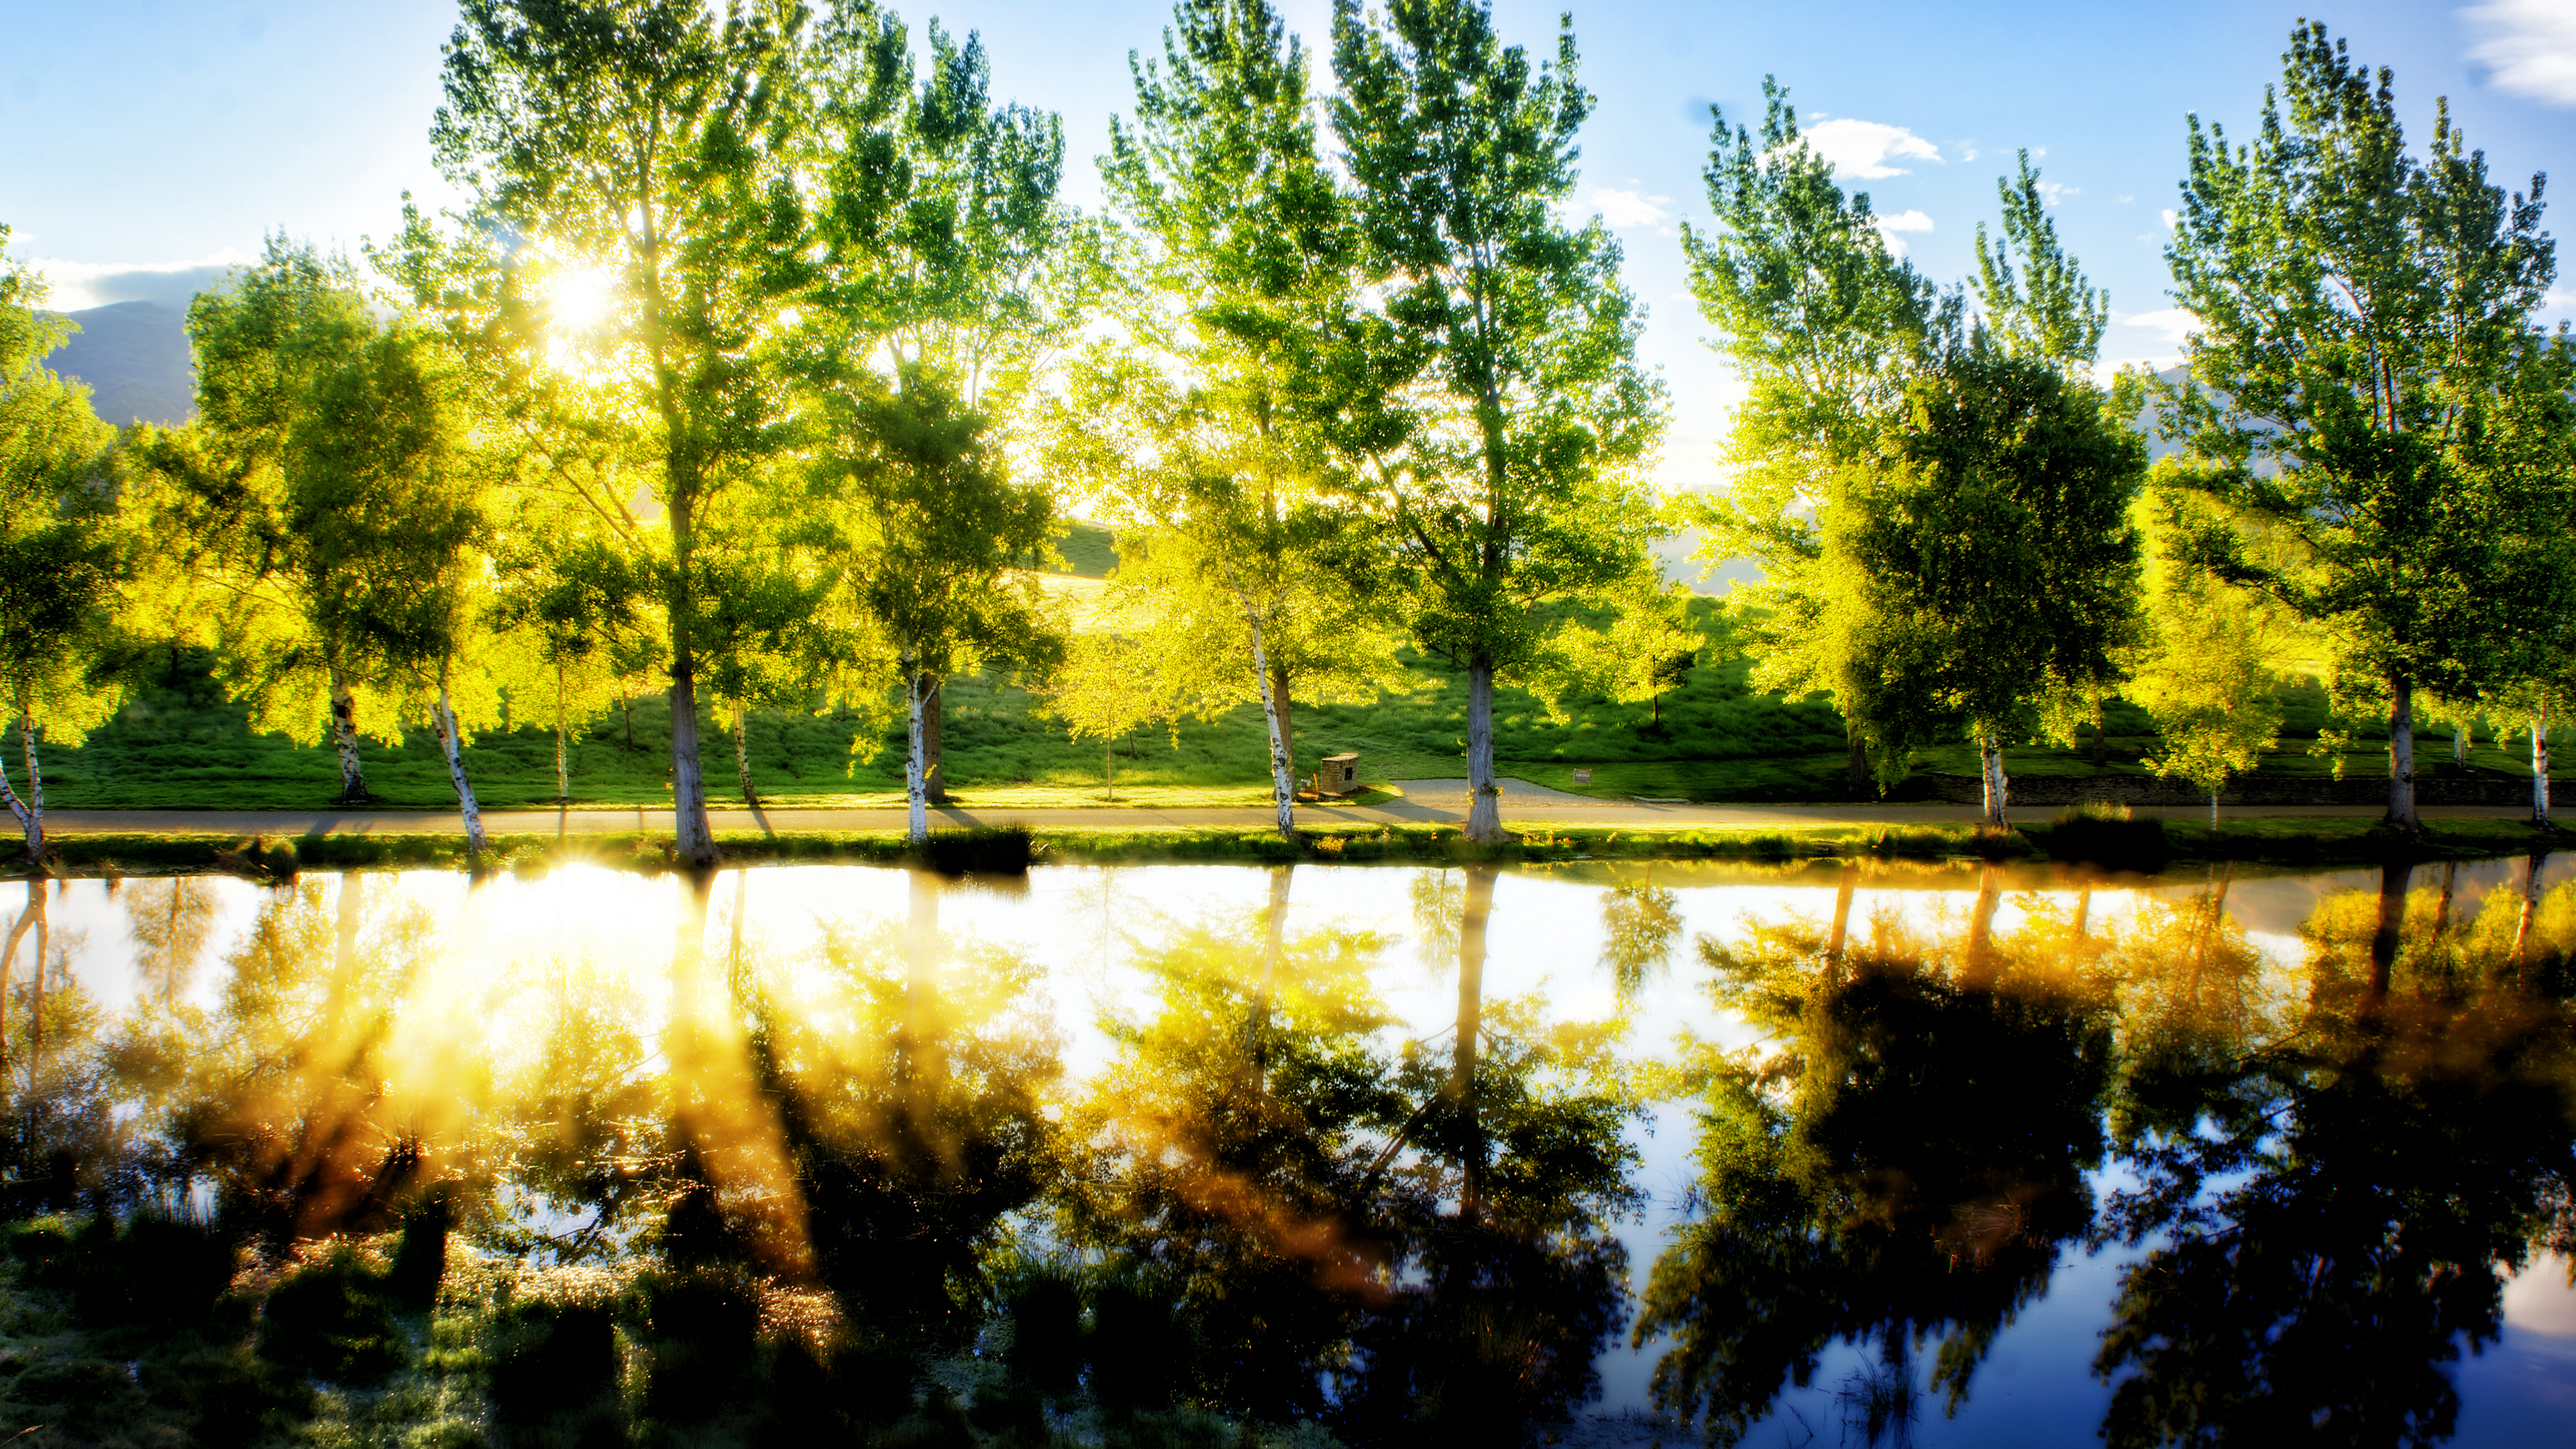 General 3840x2160 landscape water nature trees sunlight